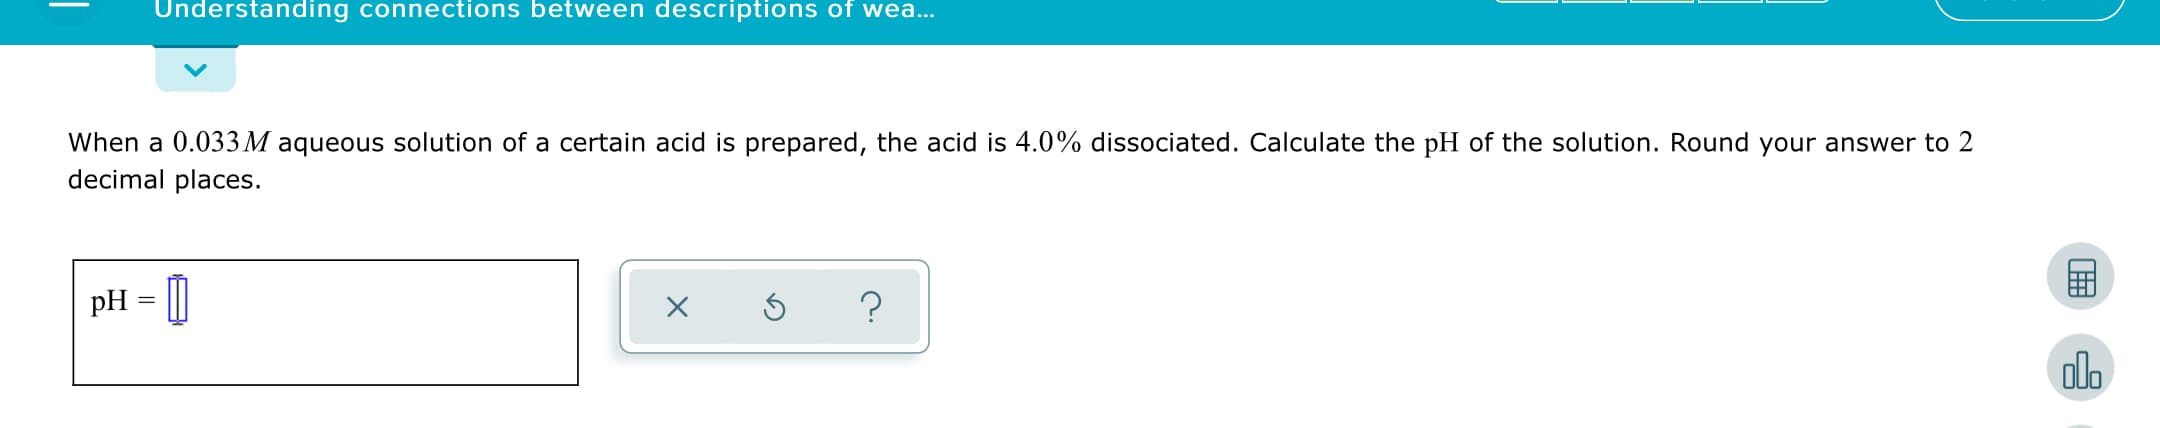 Understanding connections between descriptions of wea...
When a 0.033M aqueous solution of a certain acid is prepared, the acid is 4.0% dissociated. Calculate the pH of the solution. Round your answer to 2
decimal places.
pH = [|
dlo
